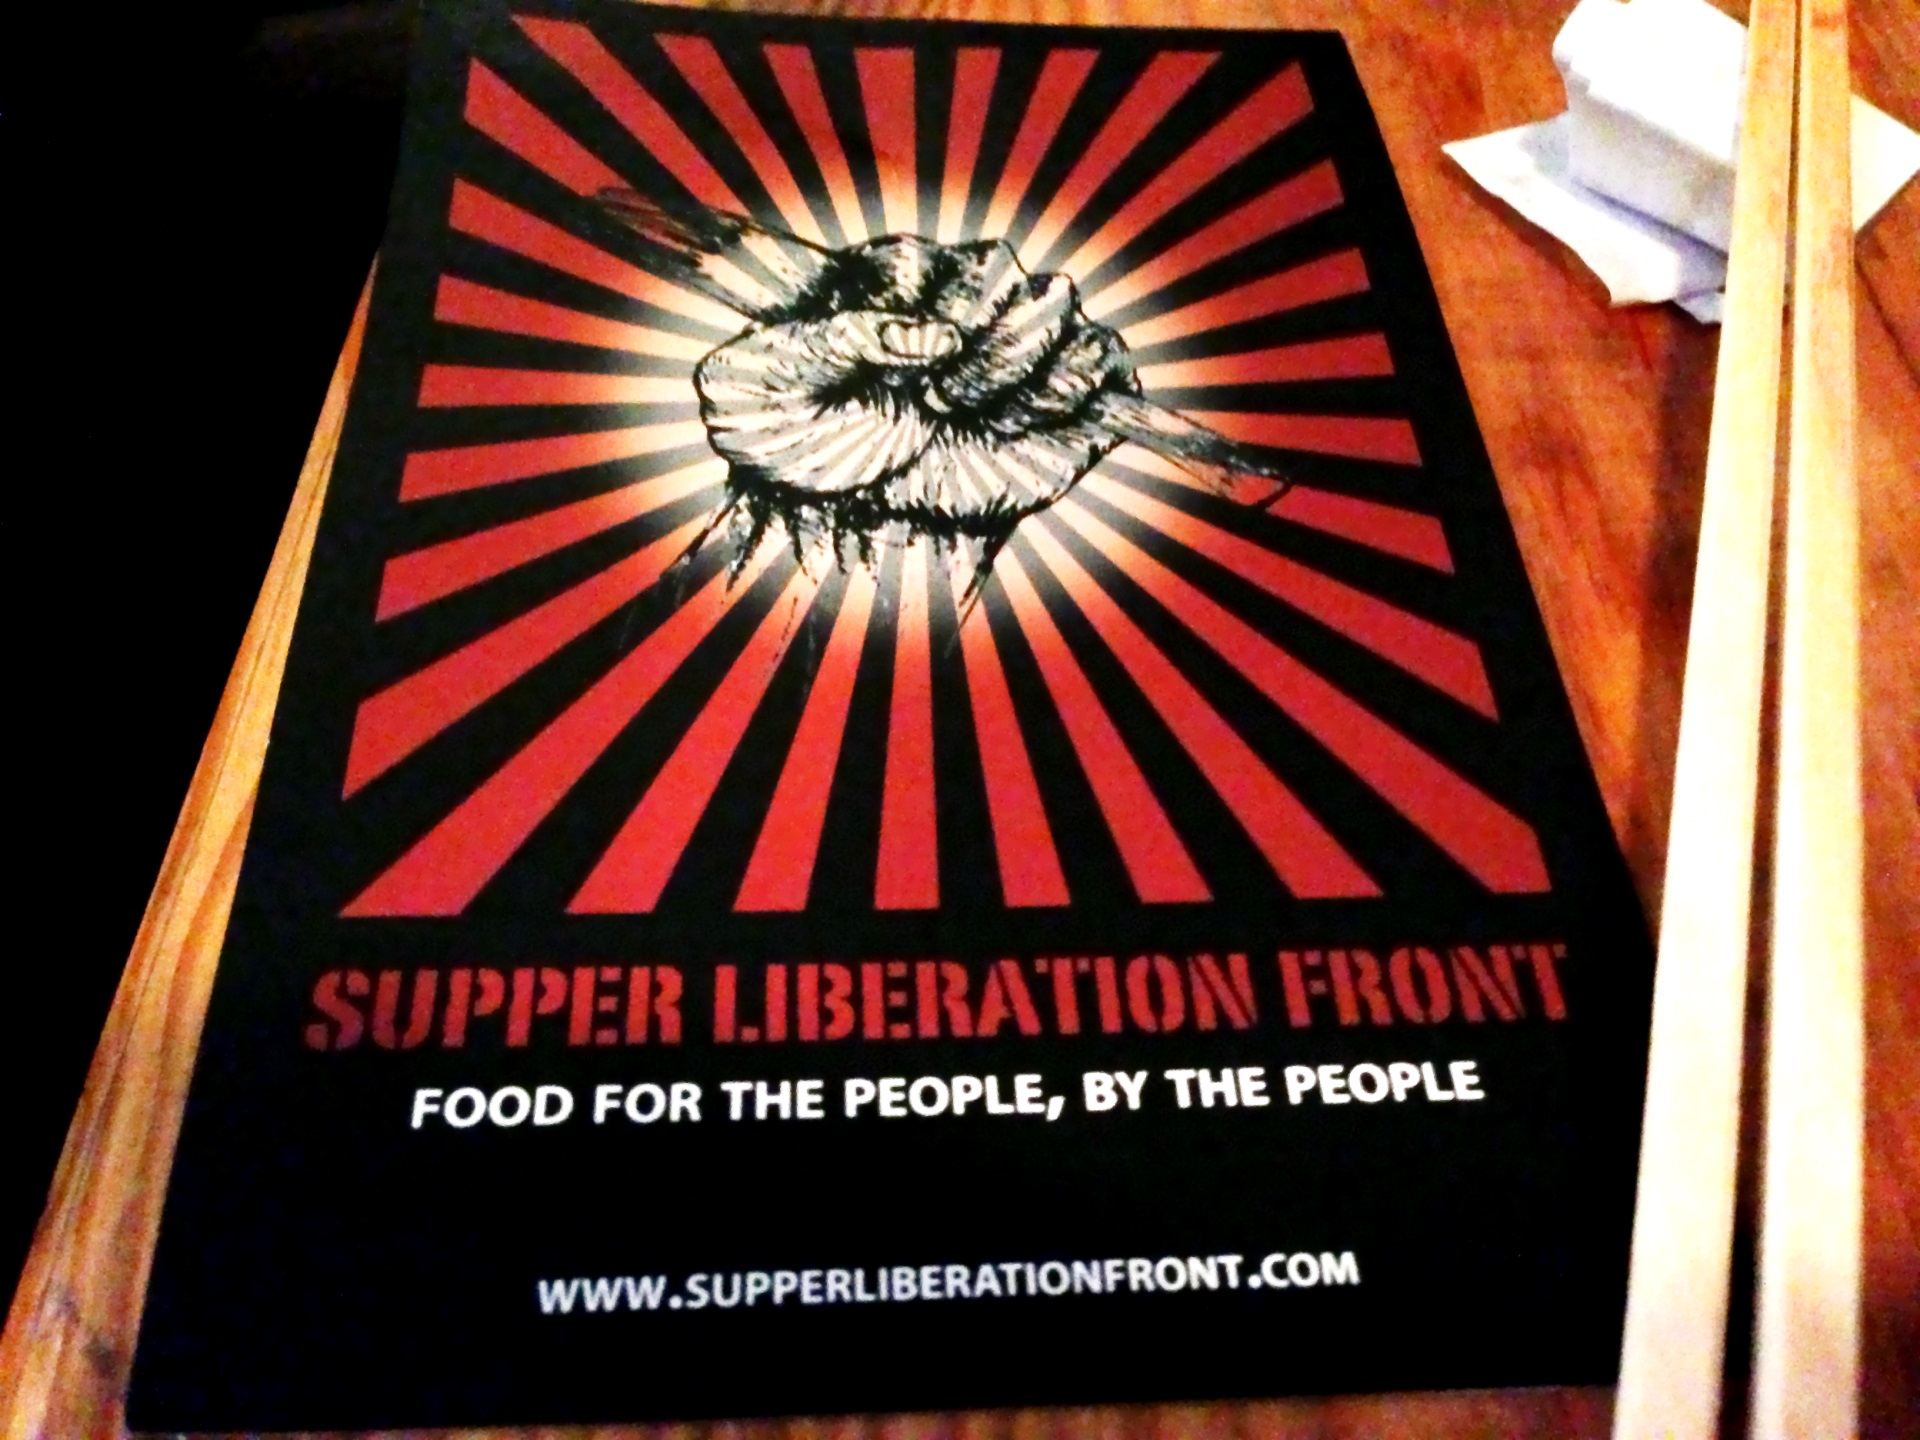 Supper Liberation Front (© 2013 The Offalo)